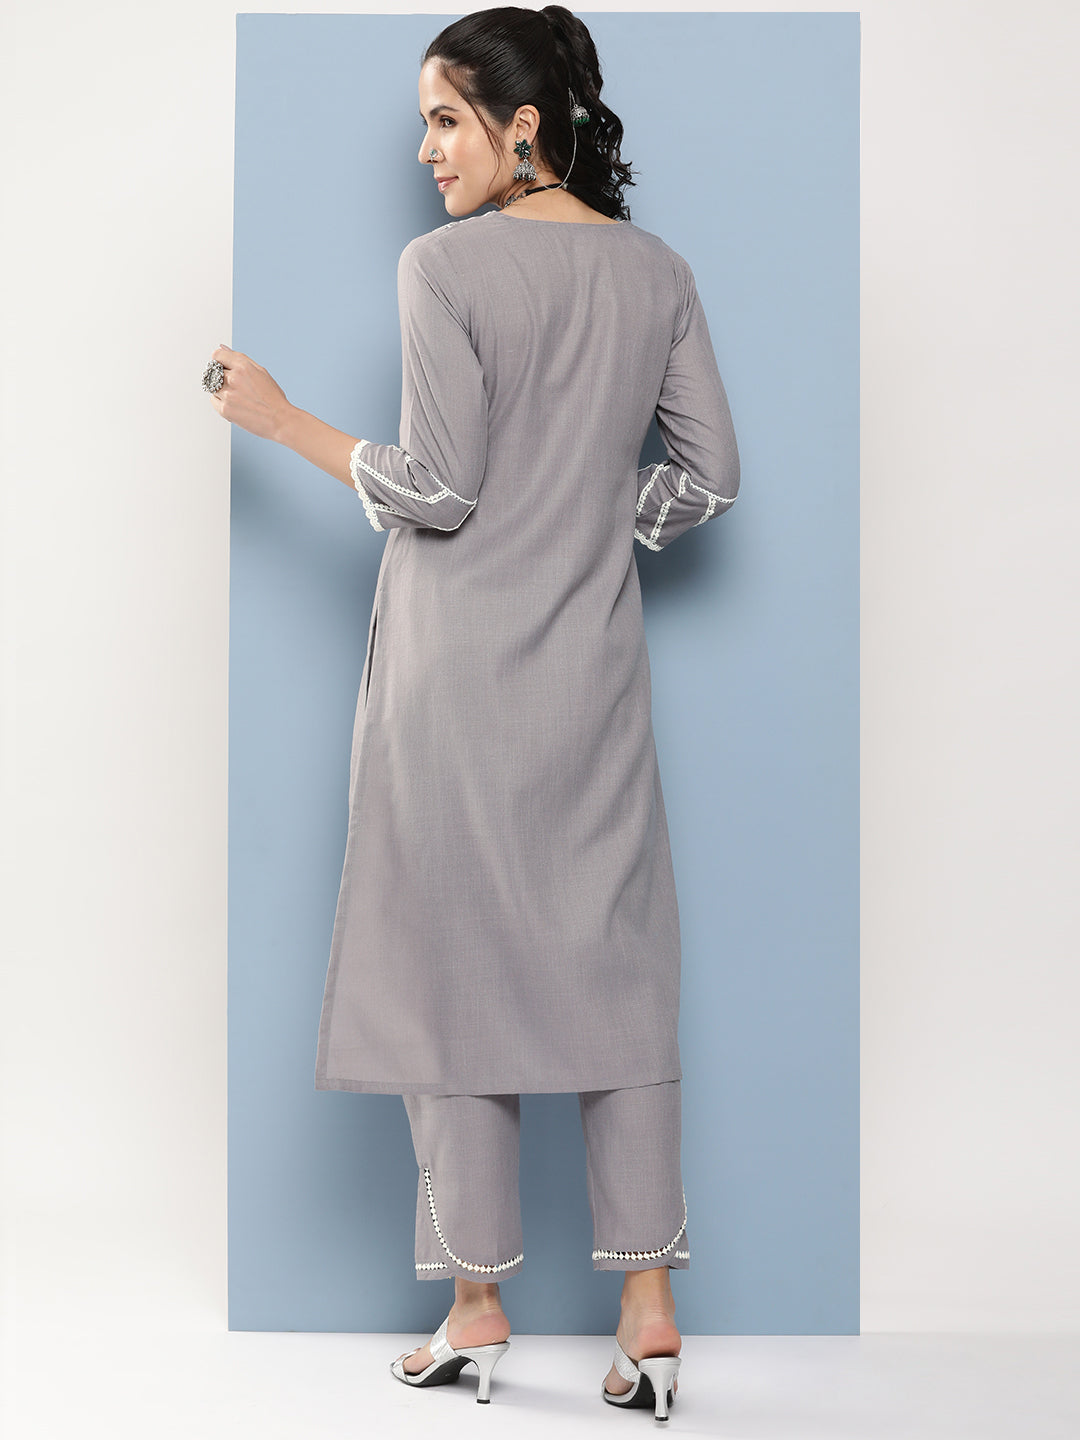 Women's Grey Embroidered A-Line Kurta With Lace Detailing With Grey Solid Palazzos - Bhama Couture